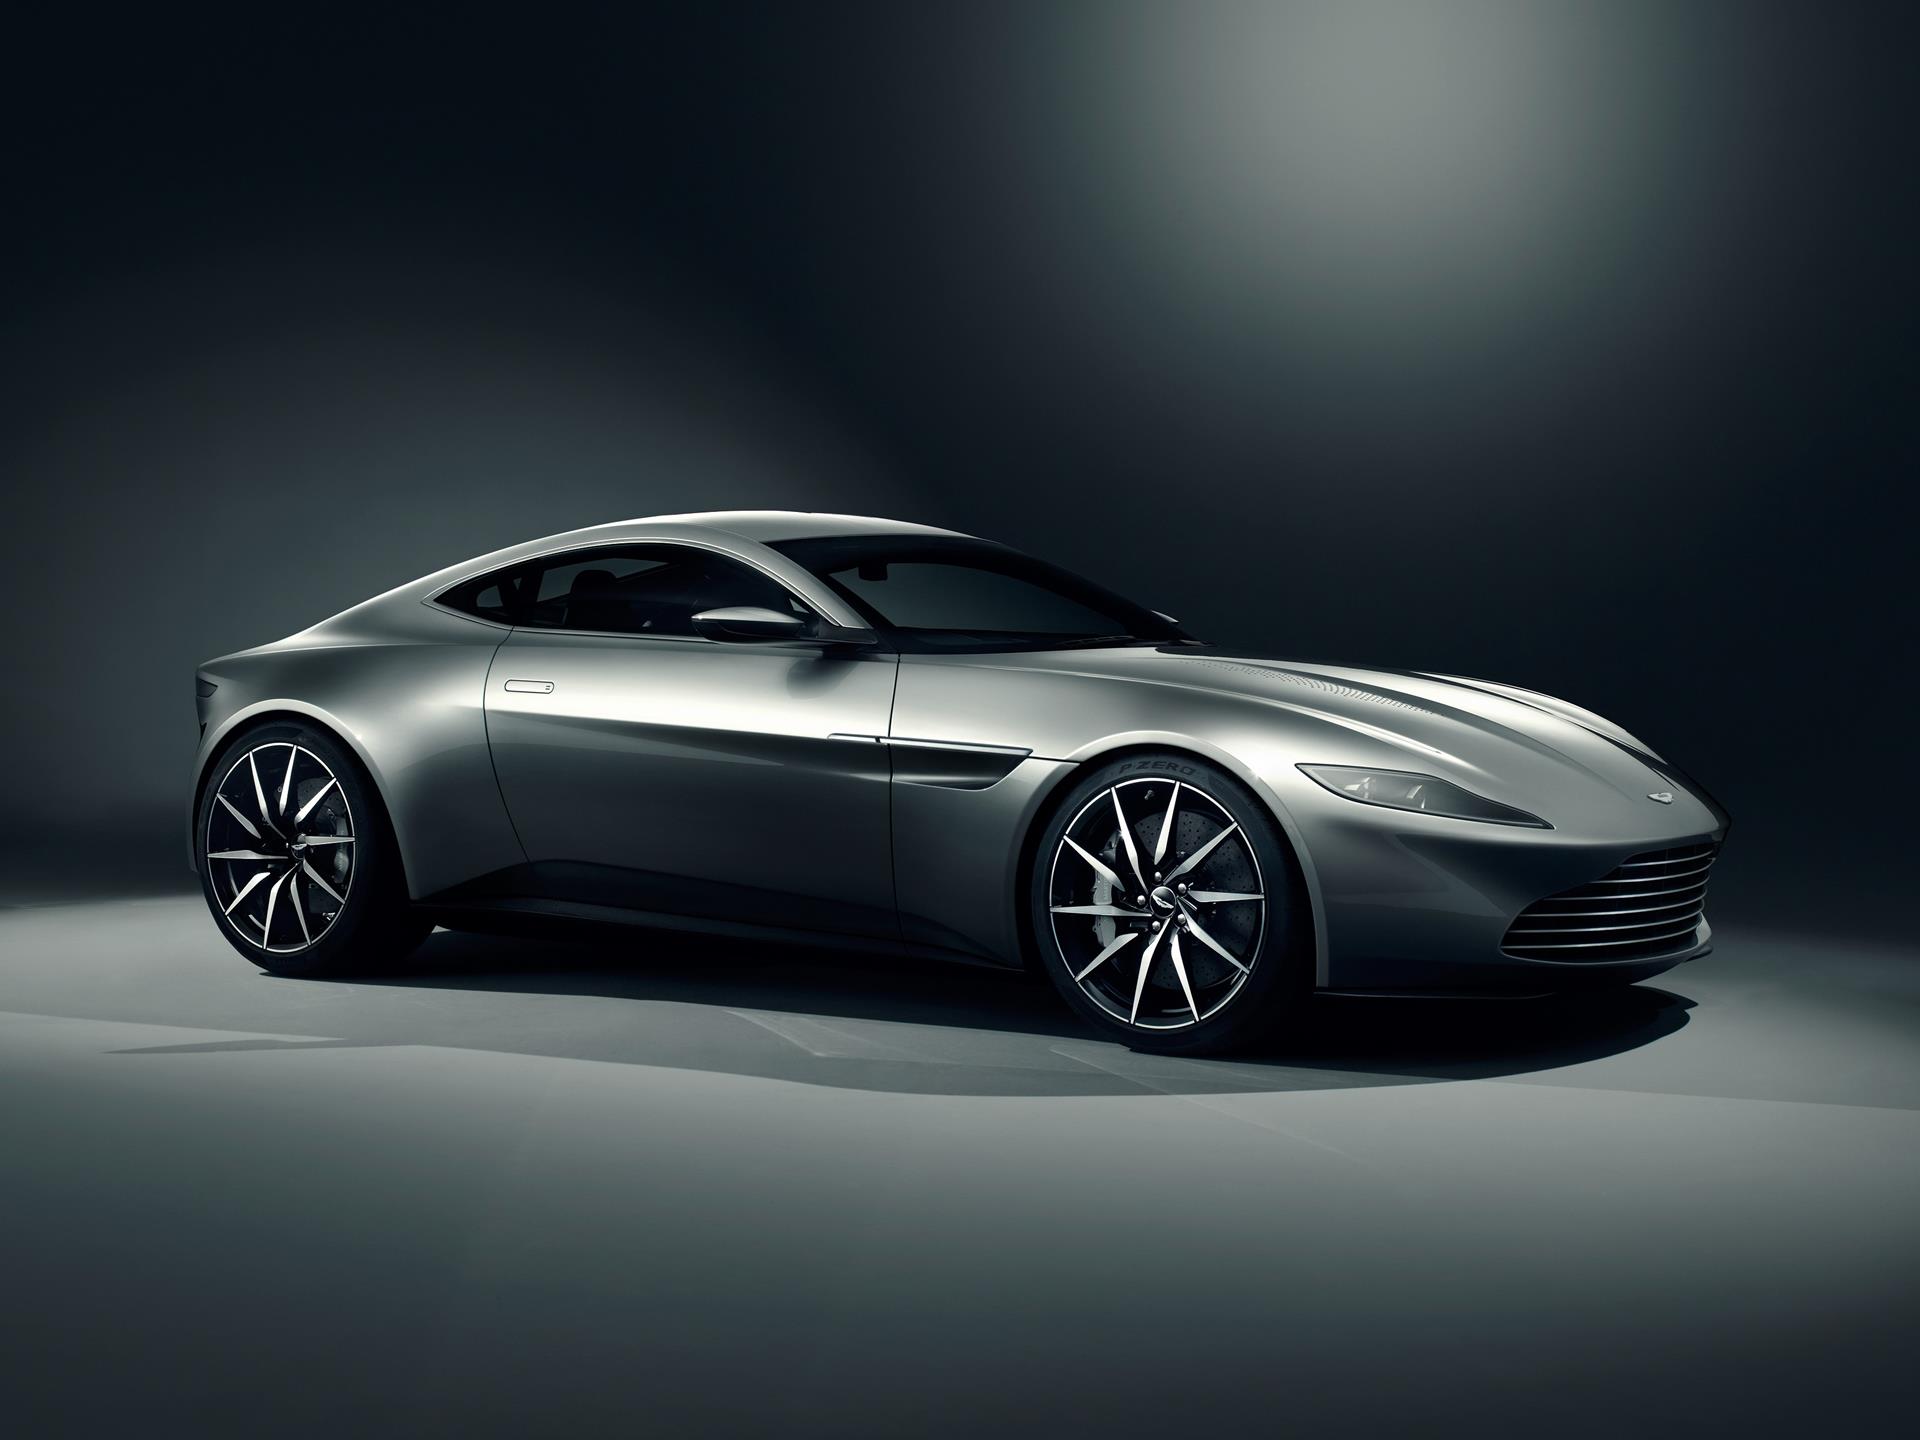 Aston Martin Db10 Wallpaper And Image Gallery